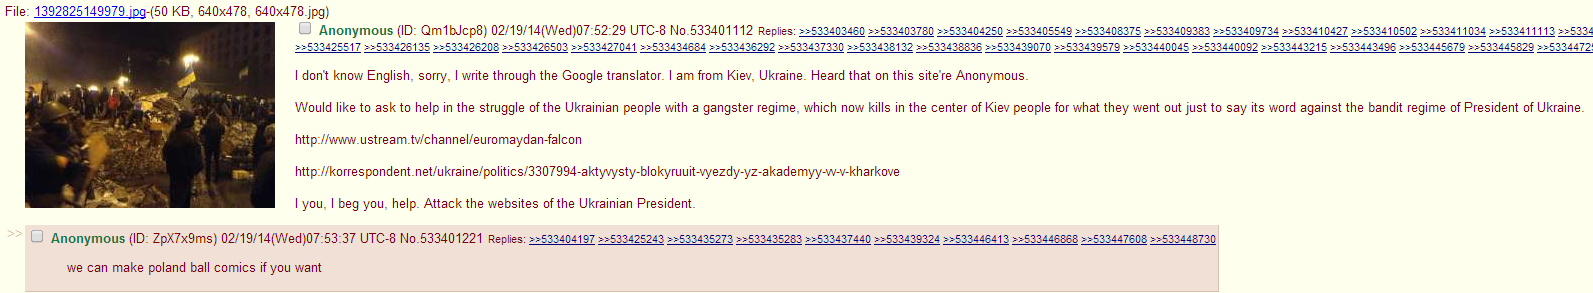 4chan the most helpful place on the internet